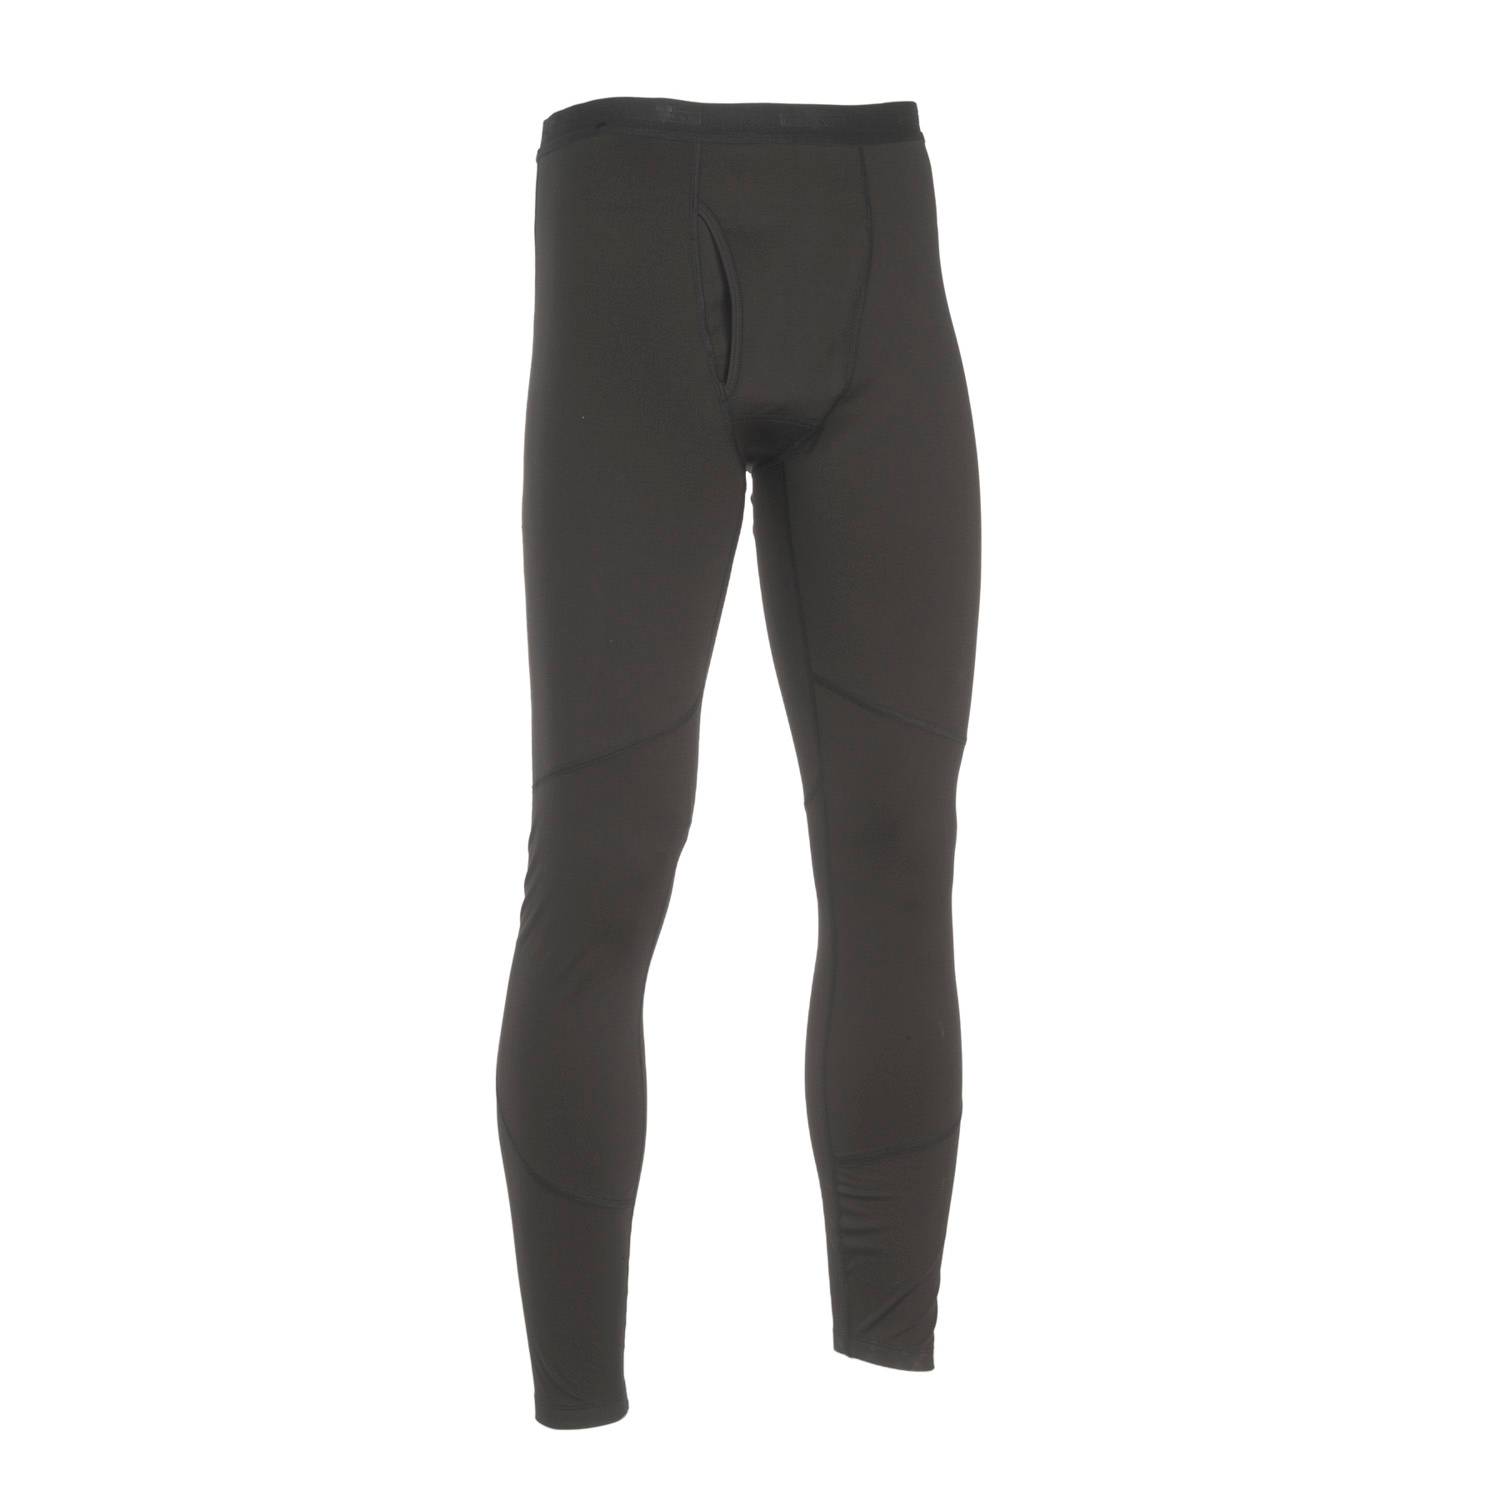 FLYING CROSS PRO FIT BASELAYER PANT